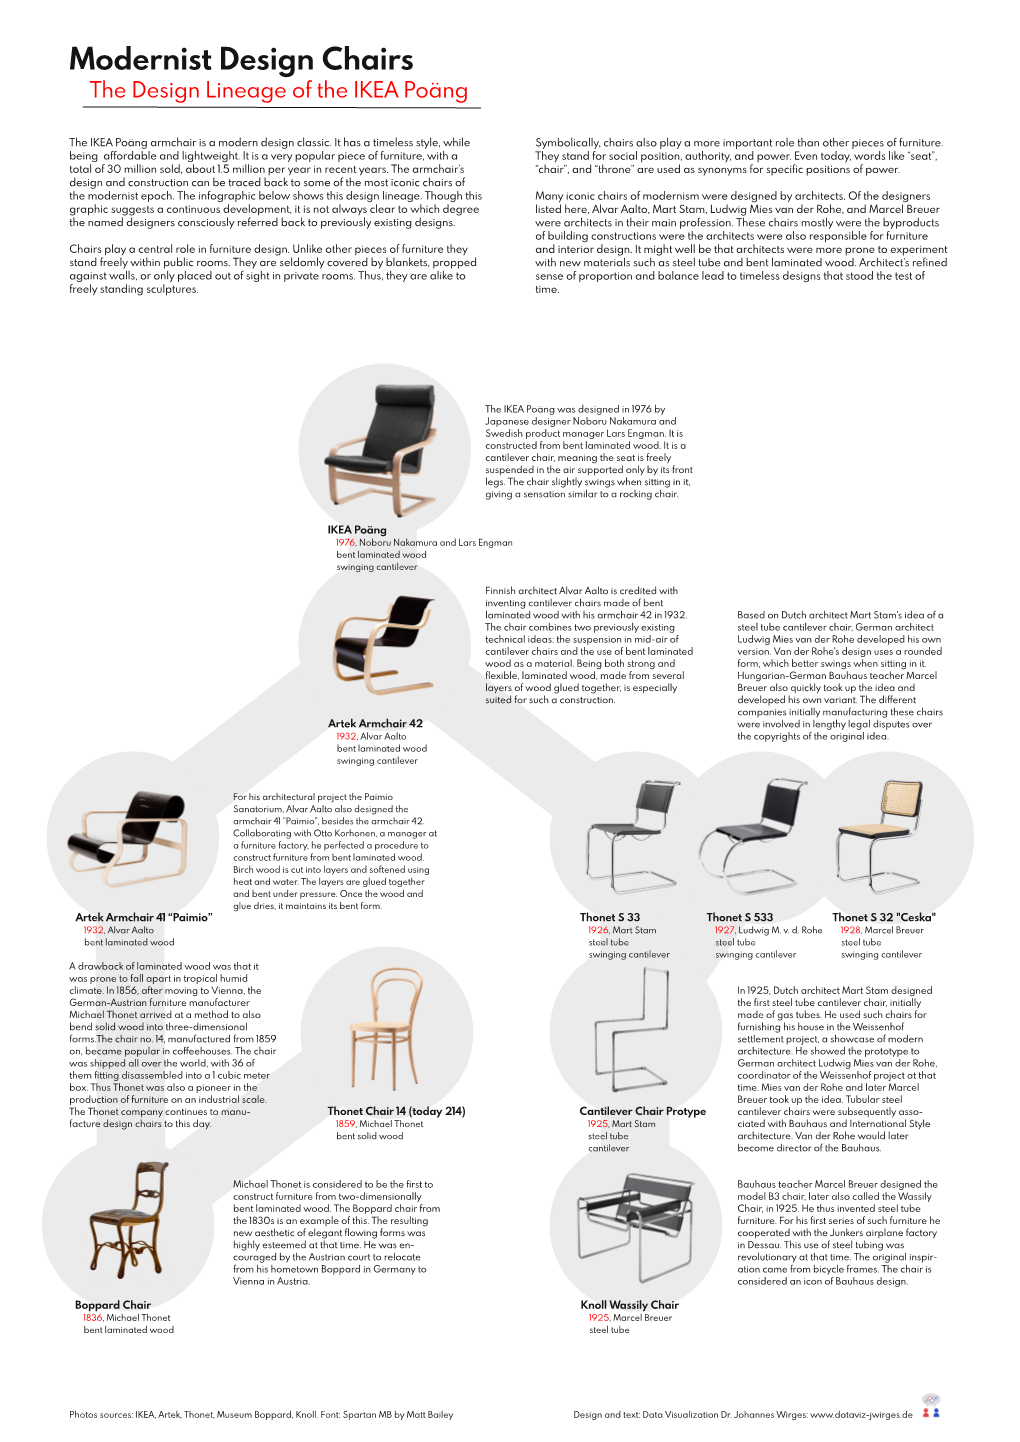 Modernist Design Chairs the Design Lineage of the IKEA Poäng